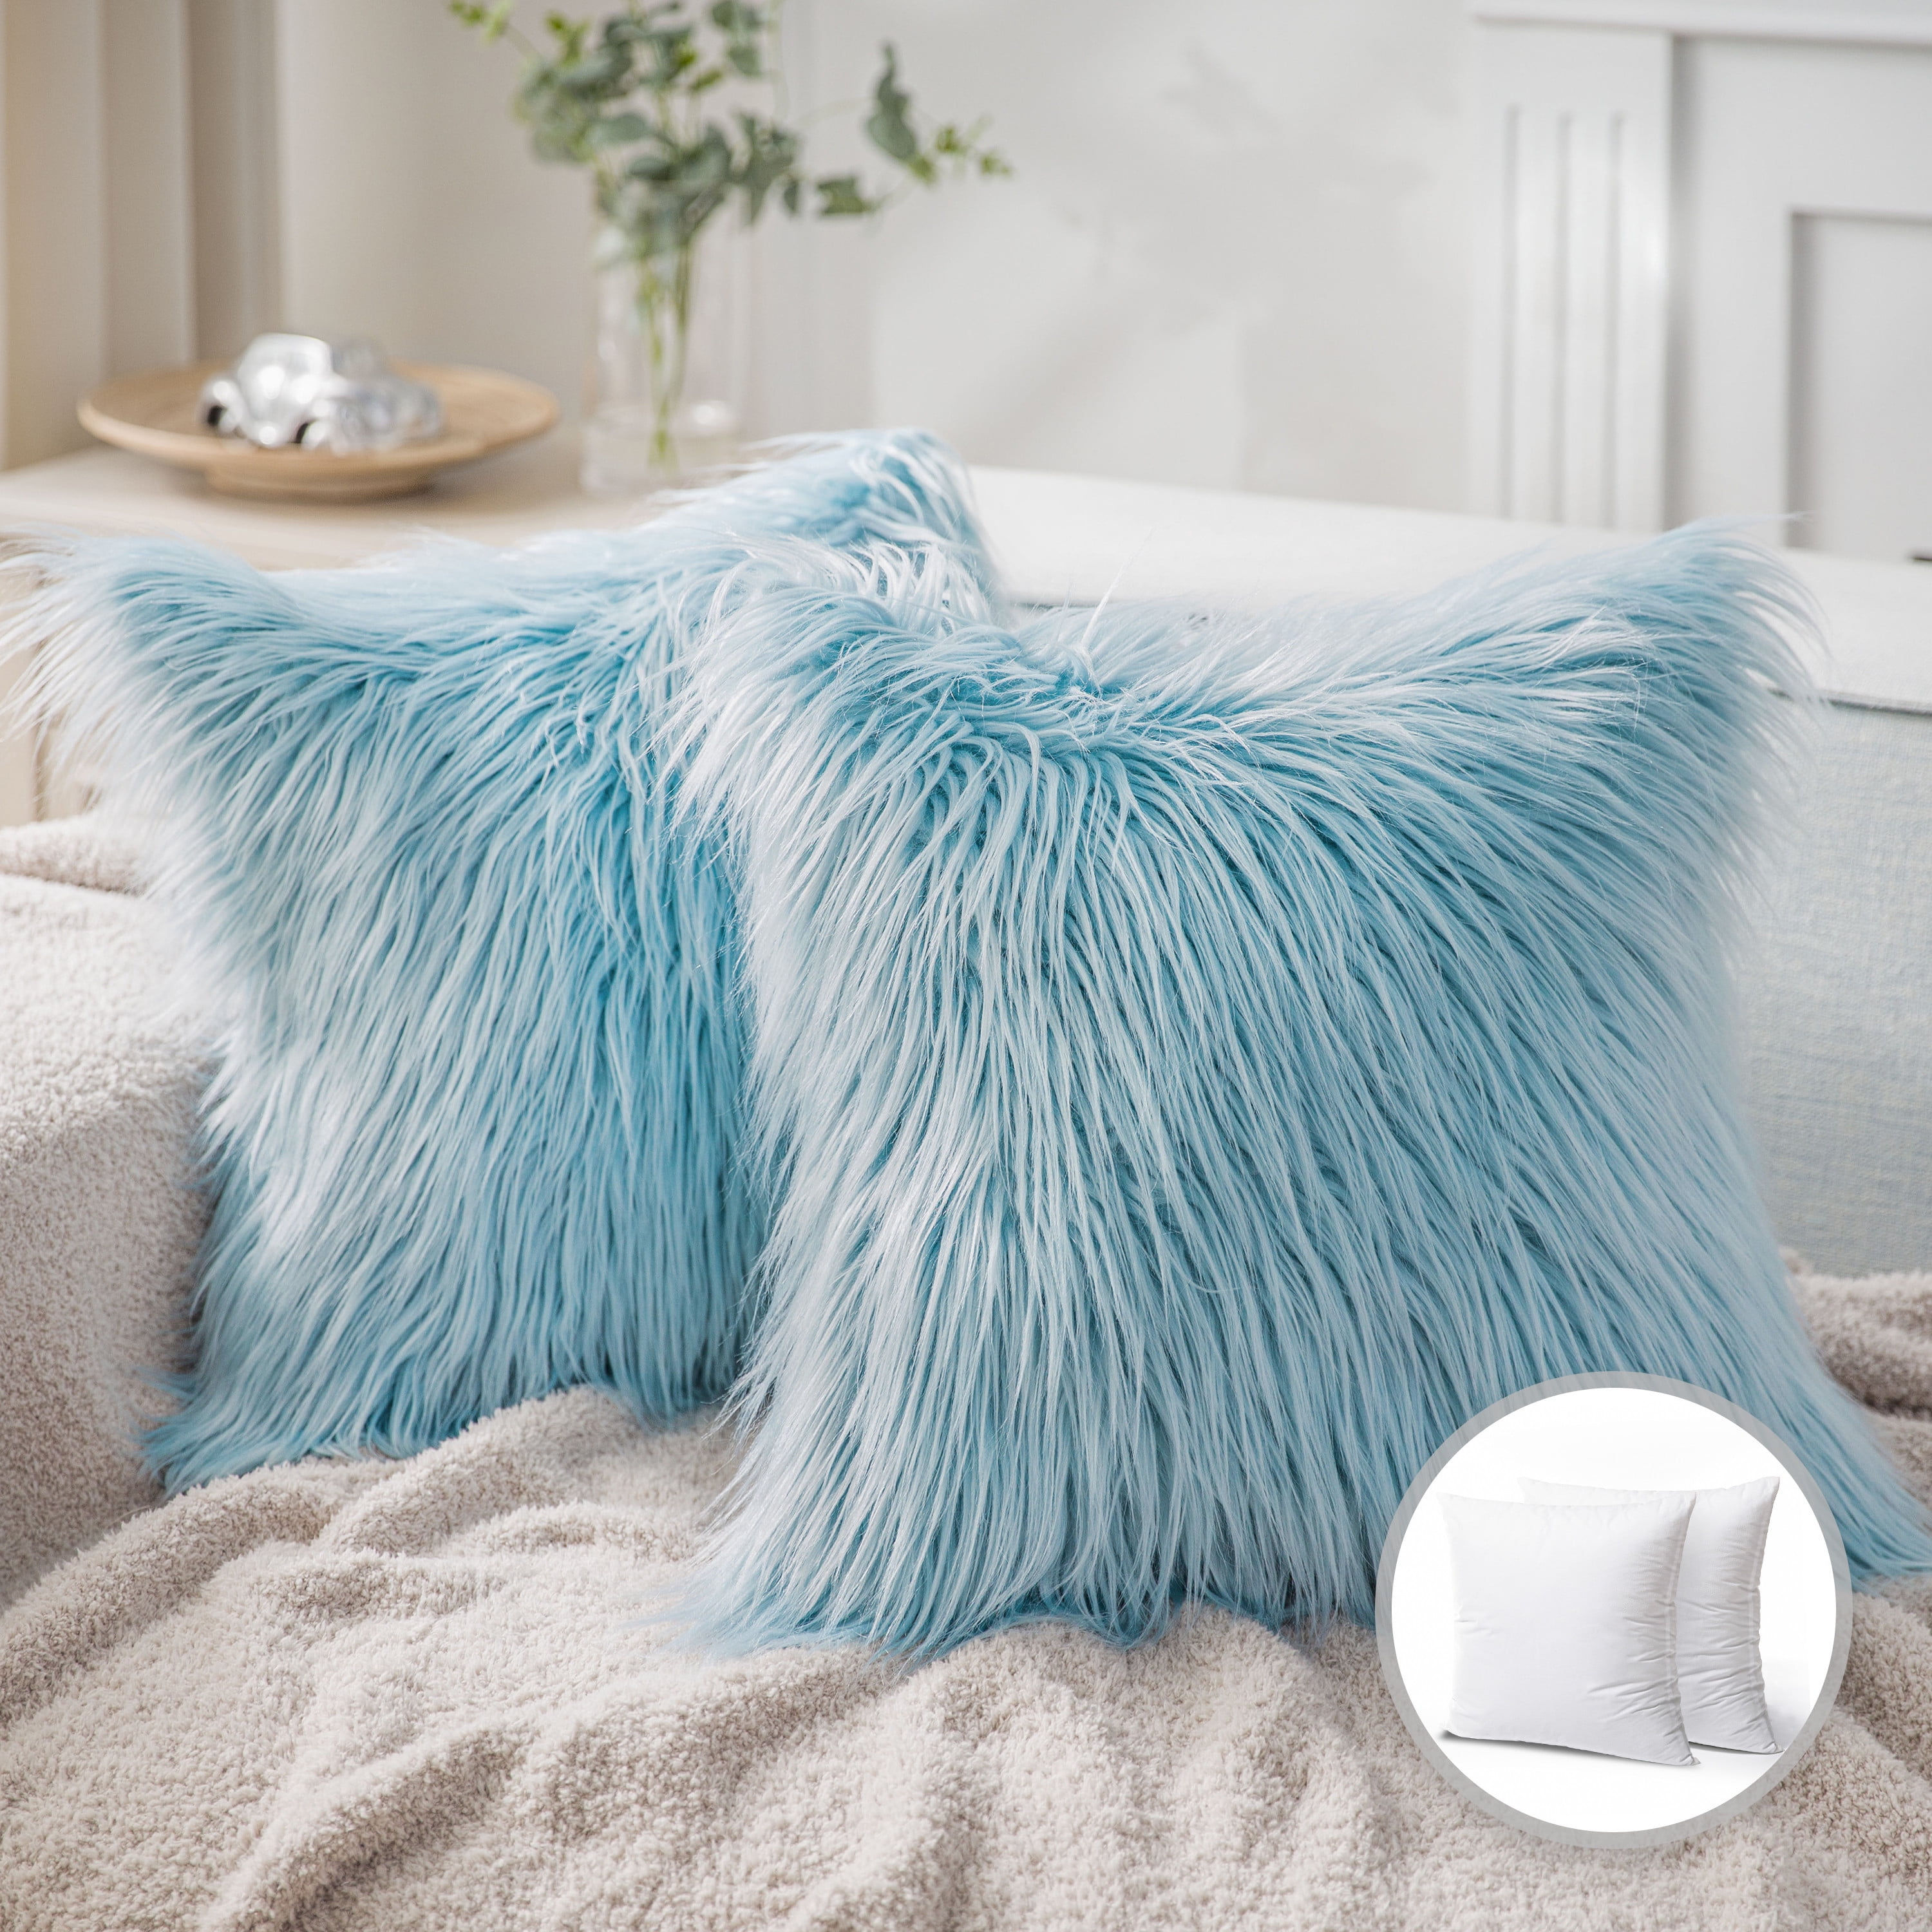 Phantoscope Luxury Mongolian Fluffy Faux Fur Series Square Decorative Throw Pillow Cusion for Couch, 20 inch x 20 inch, Light Blue, 2 Pack, Size: 20 x